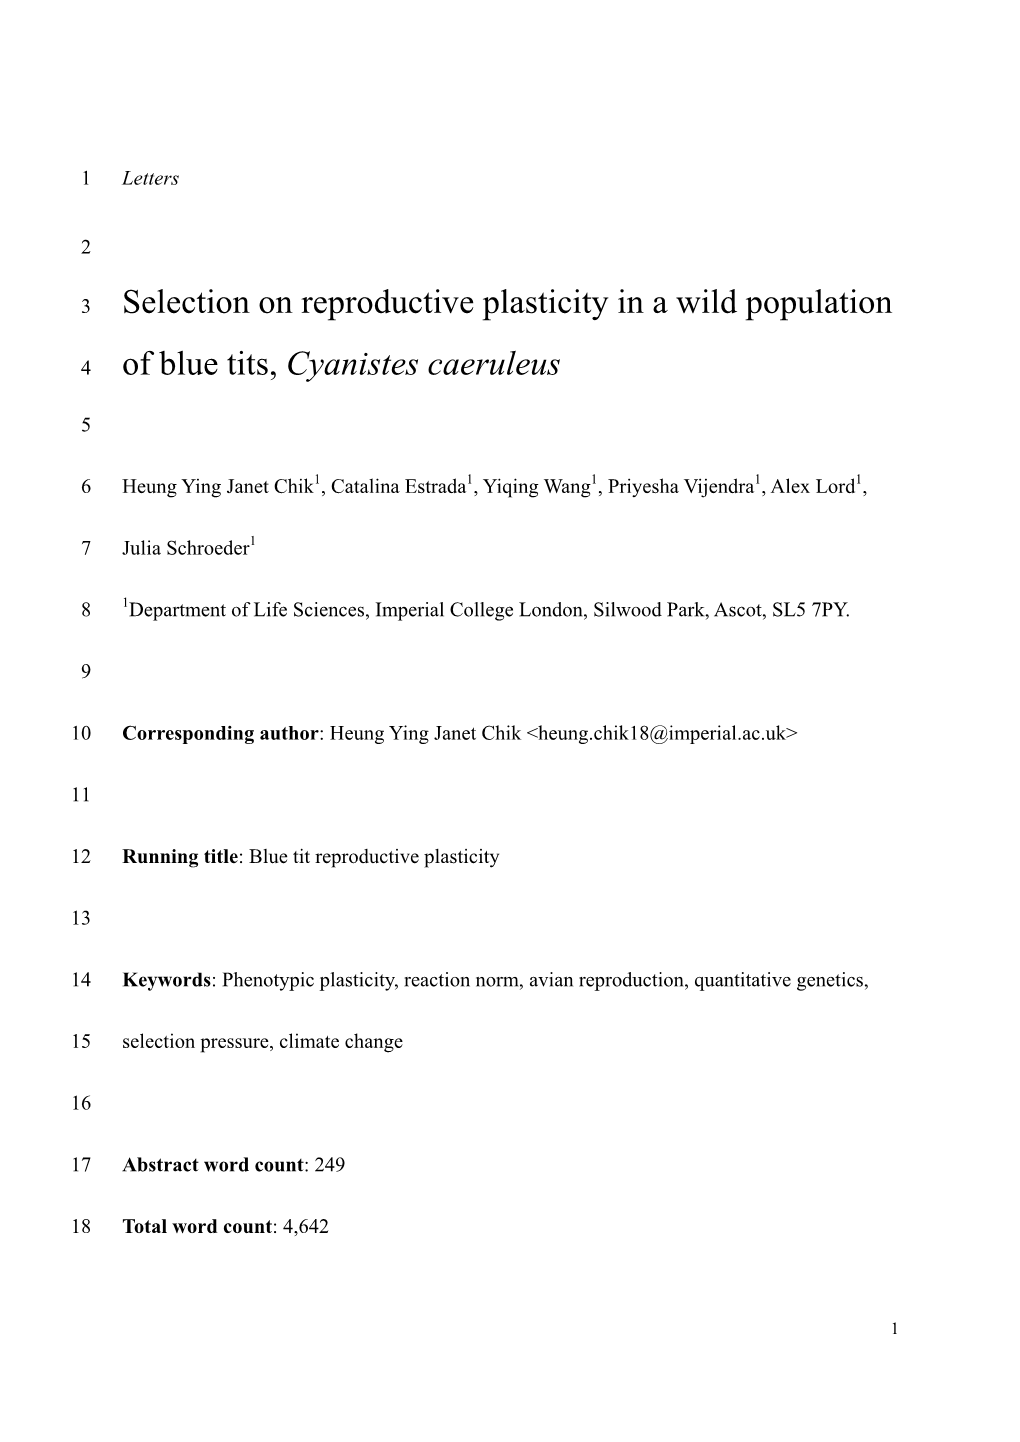 Selection on Reproductive Plasticity in a Wild Population of Blue Tits, Cyanistes Caeruleus